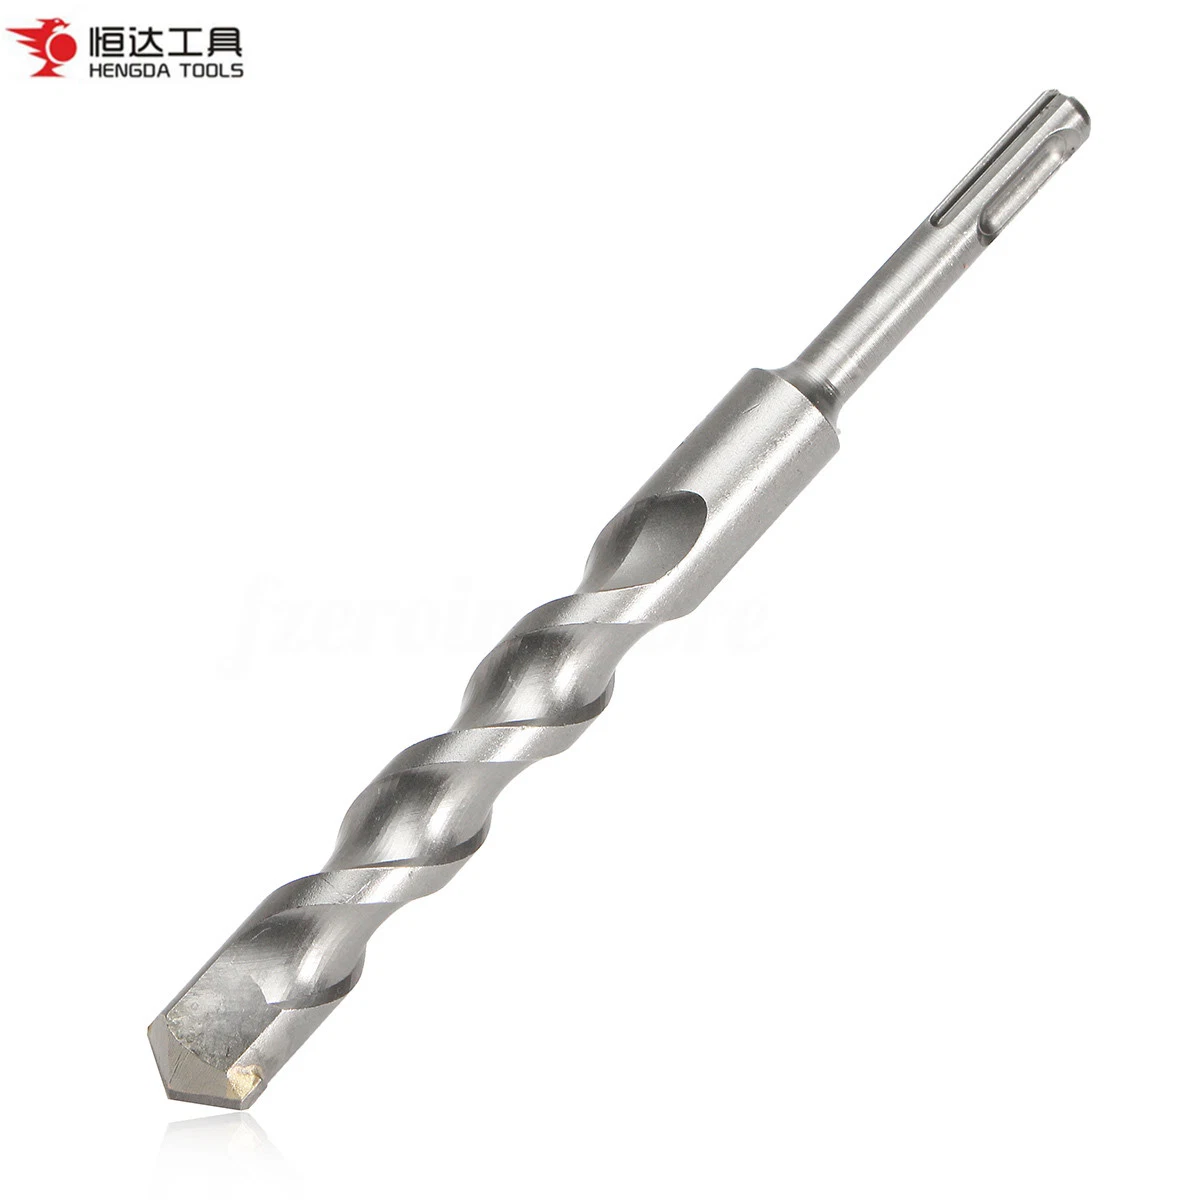 Solid Carbide Metal Drilling Hammer Drill Bit Hot Selling China Wholesale/Supplier Hammer Drill